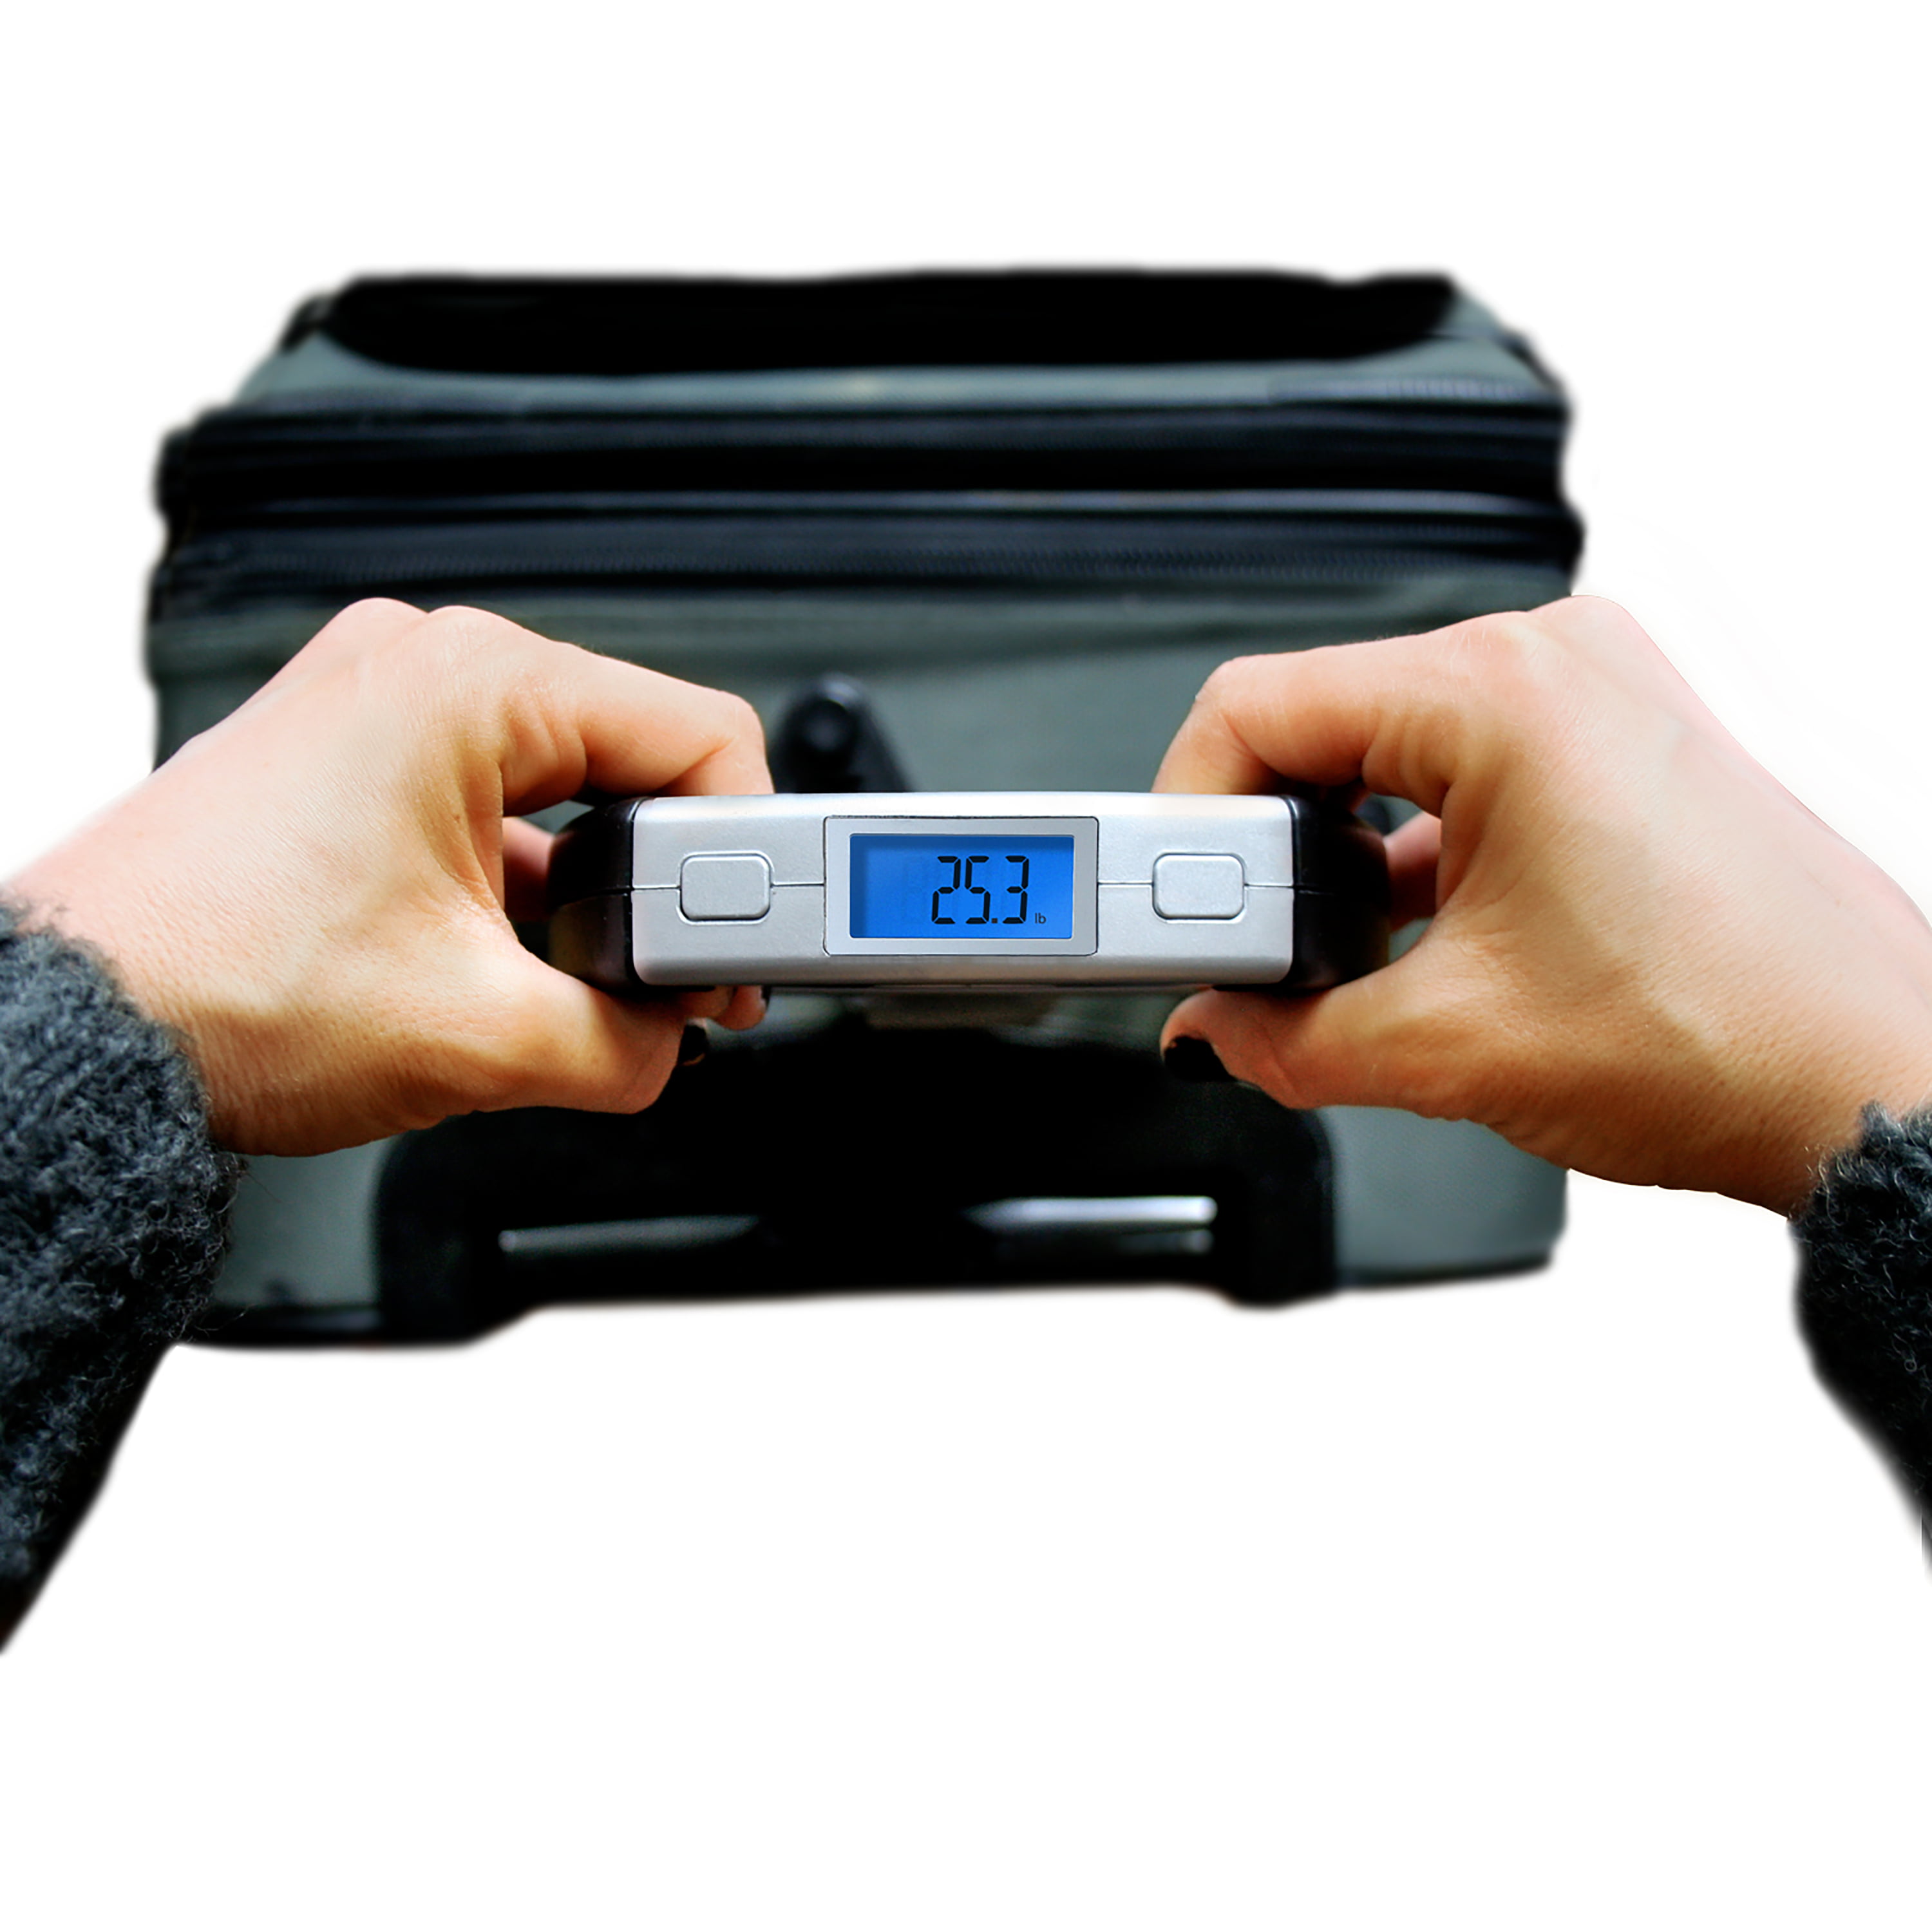 REI Co-op Digital Luggage Scale - Small